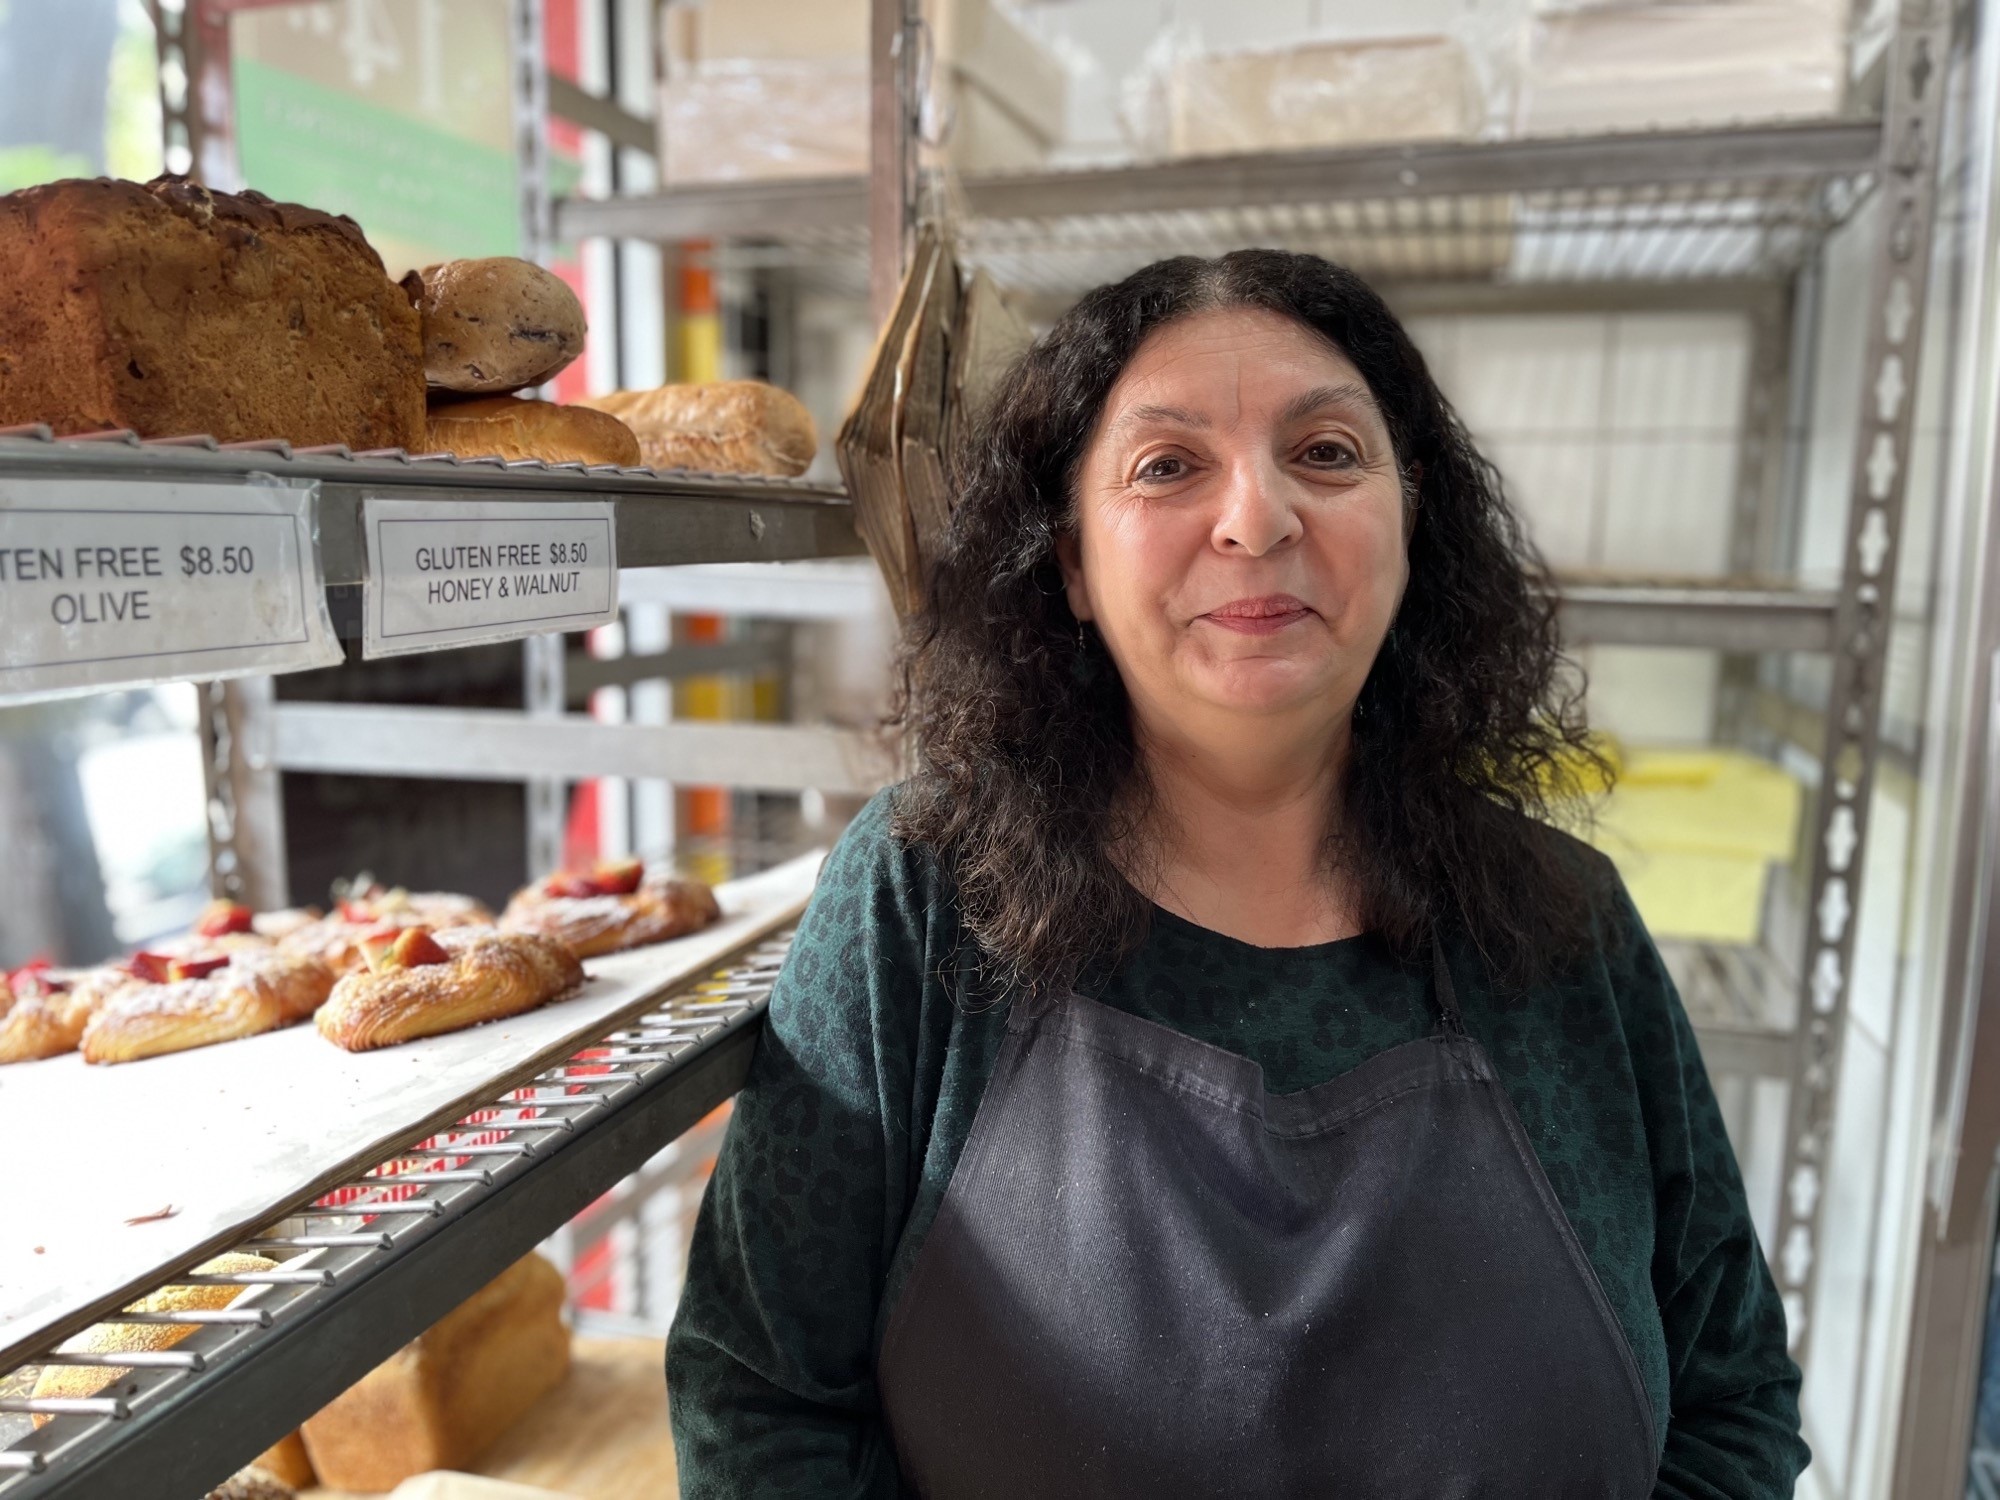 Sandra Cucuzza stands in front of baked goods and smiles for the camera.